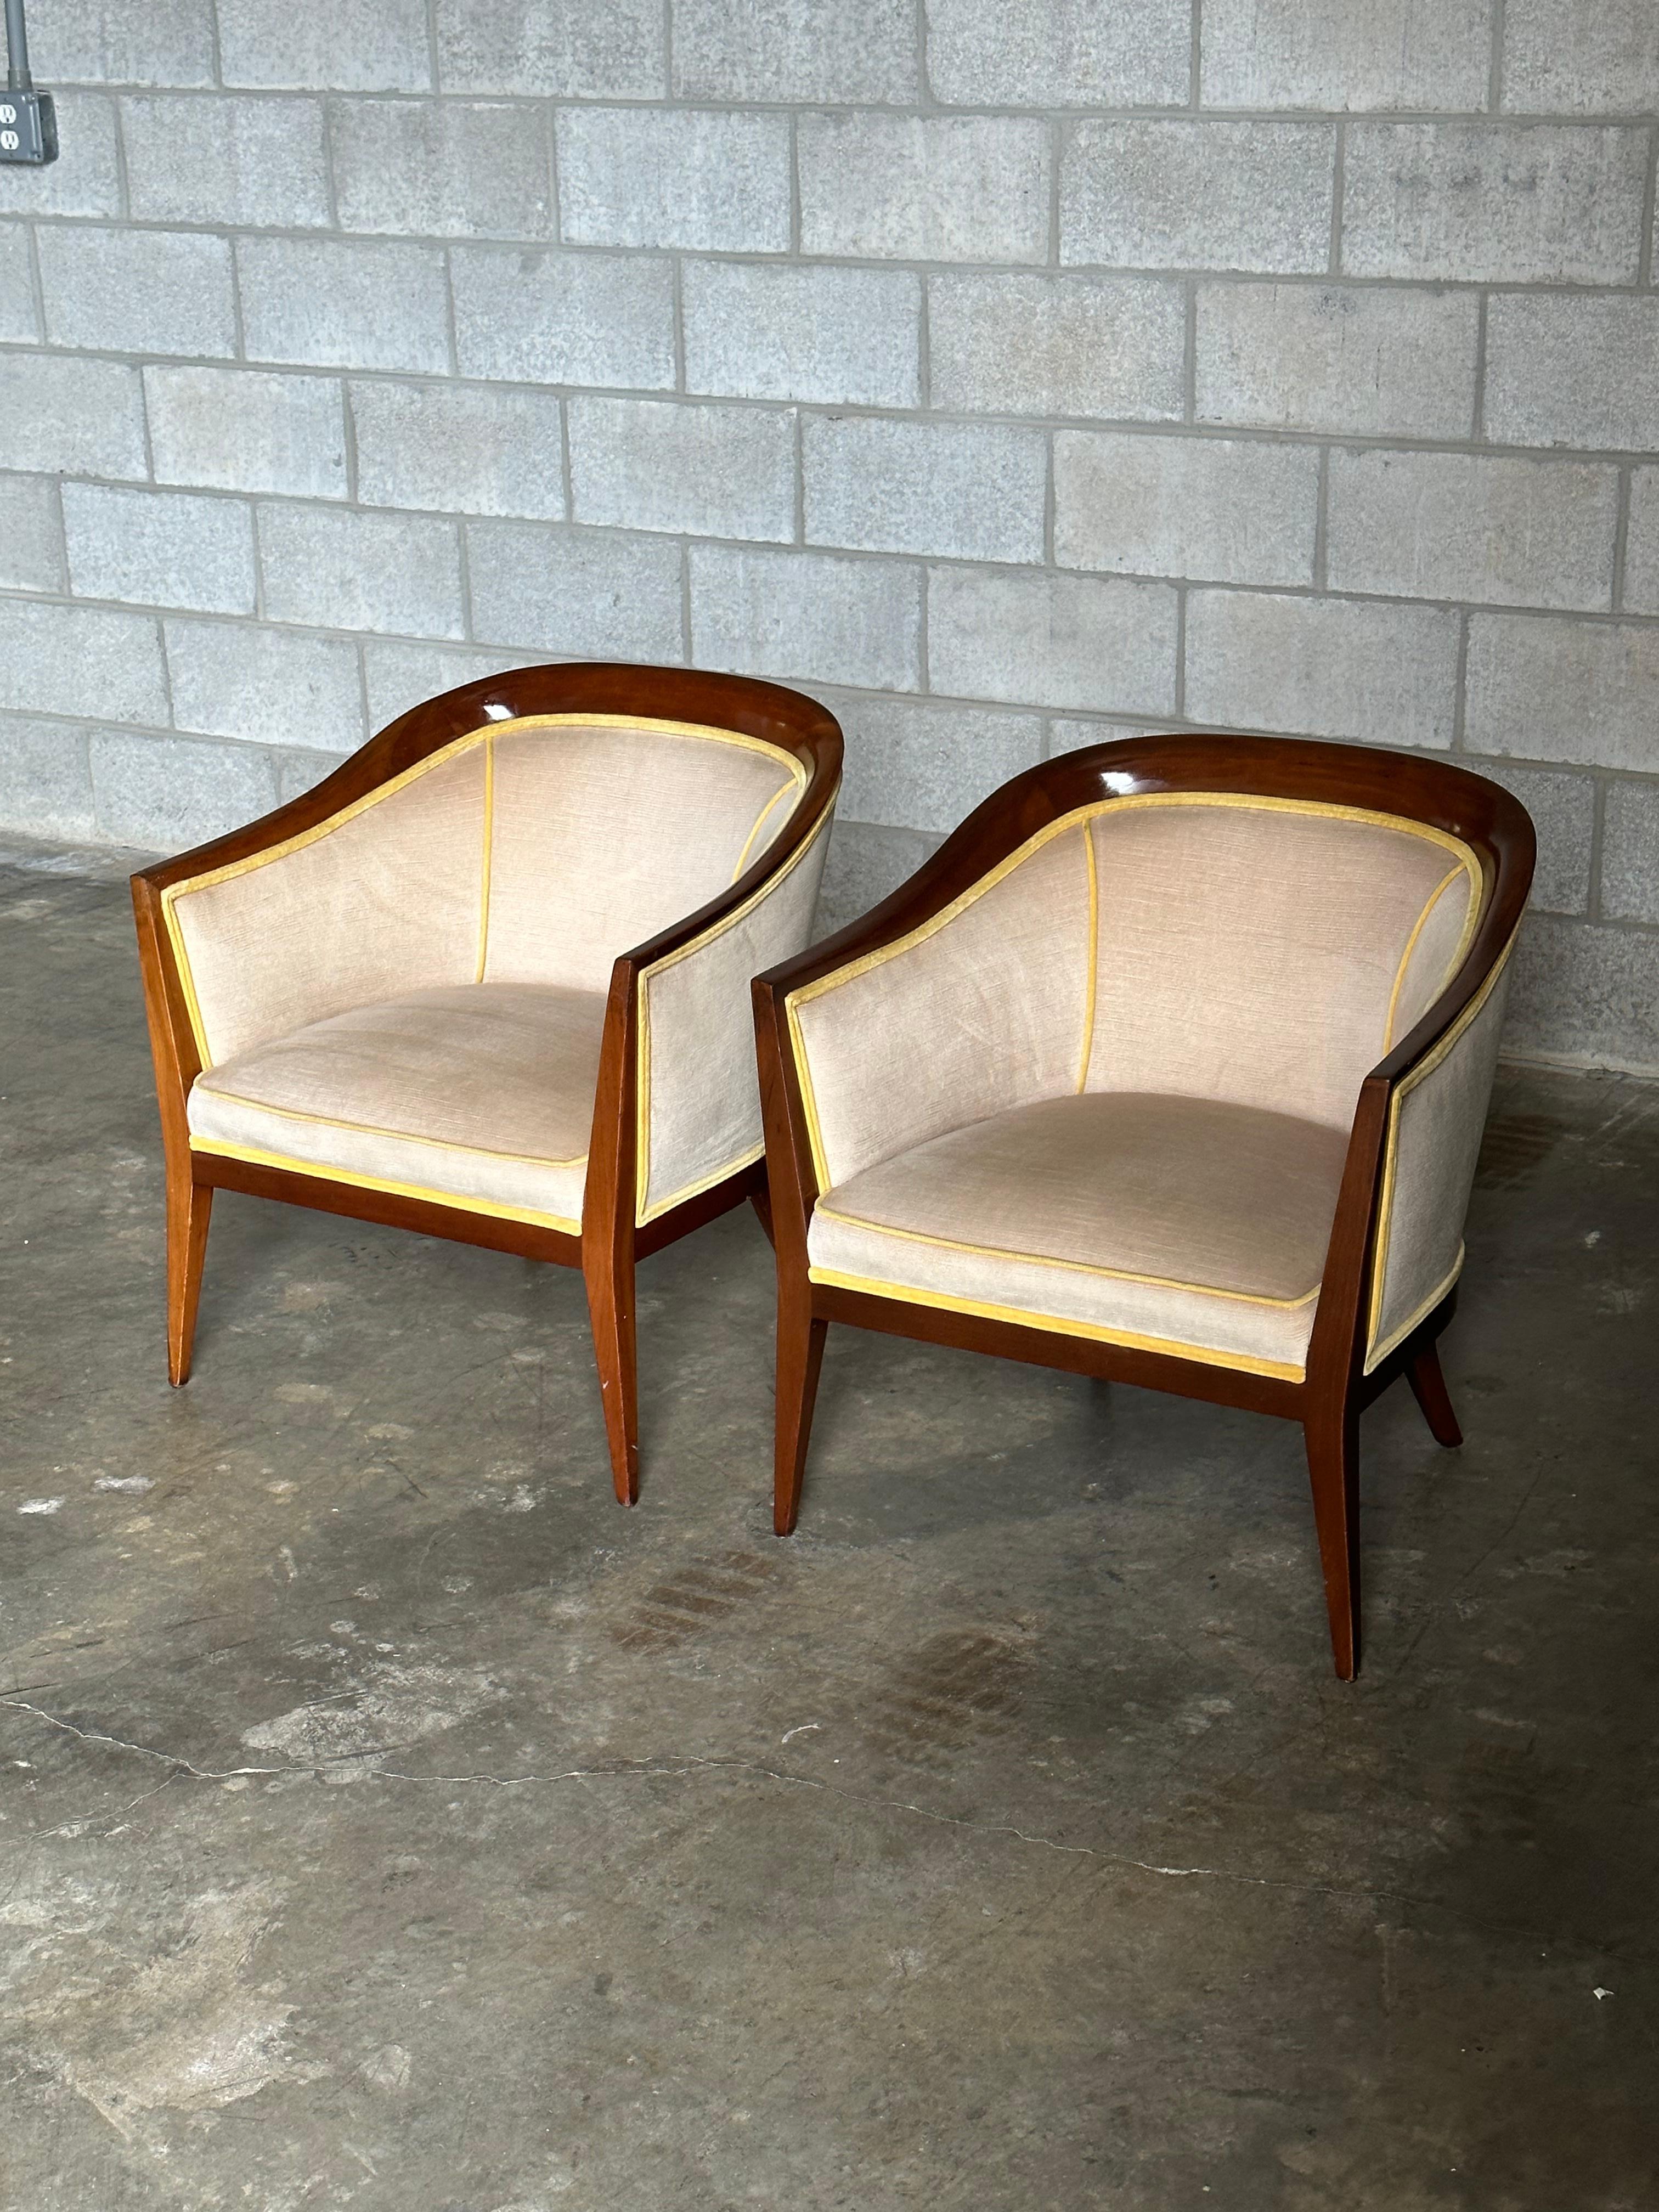 Mid-20th Century Mid Century Modern Curved Back Arm Chairs Walnut Accents After Harvey Probber